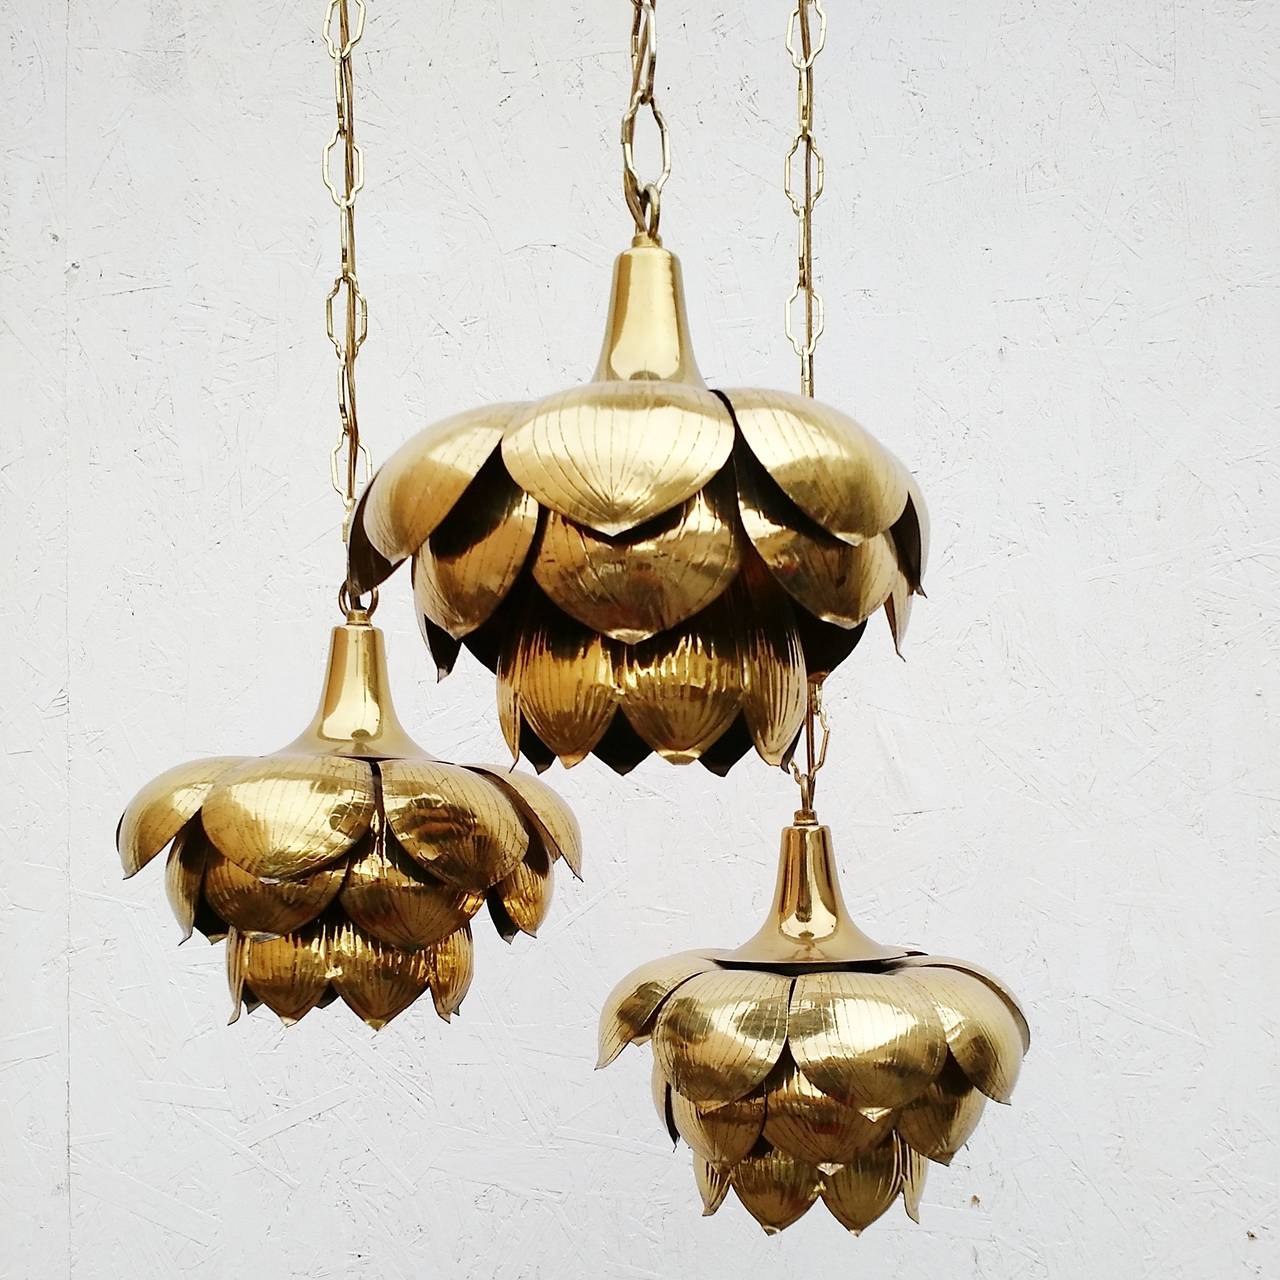 Brass pendant chandelier with three chain hanging lotus flowers, circa 1950s.
Huge mirror finish brass dish ceiling cap,
Marked 